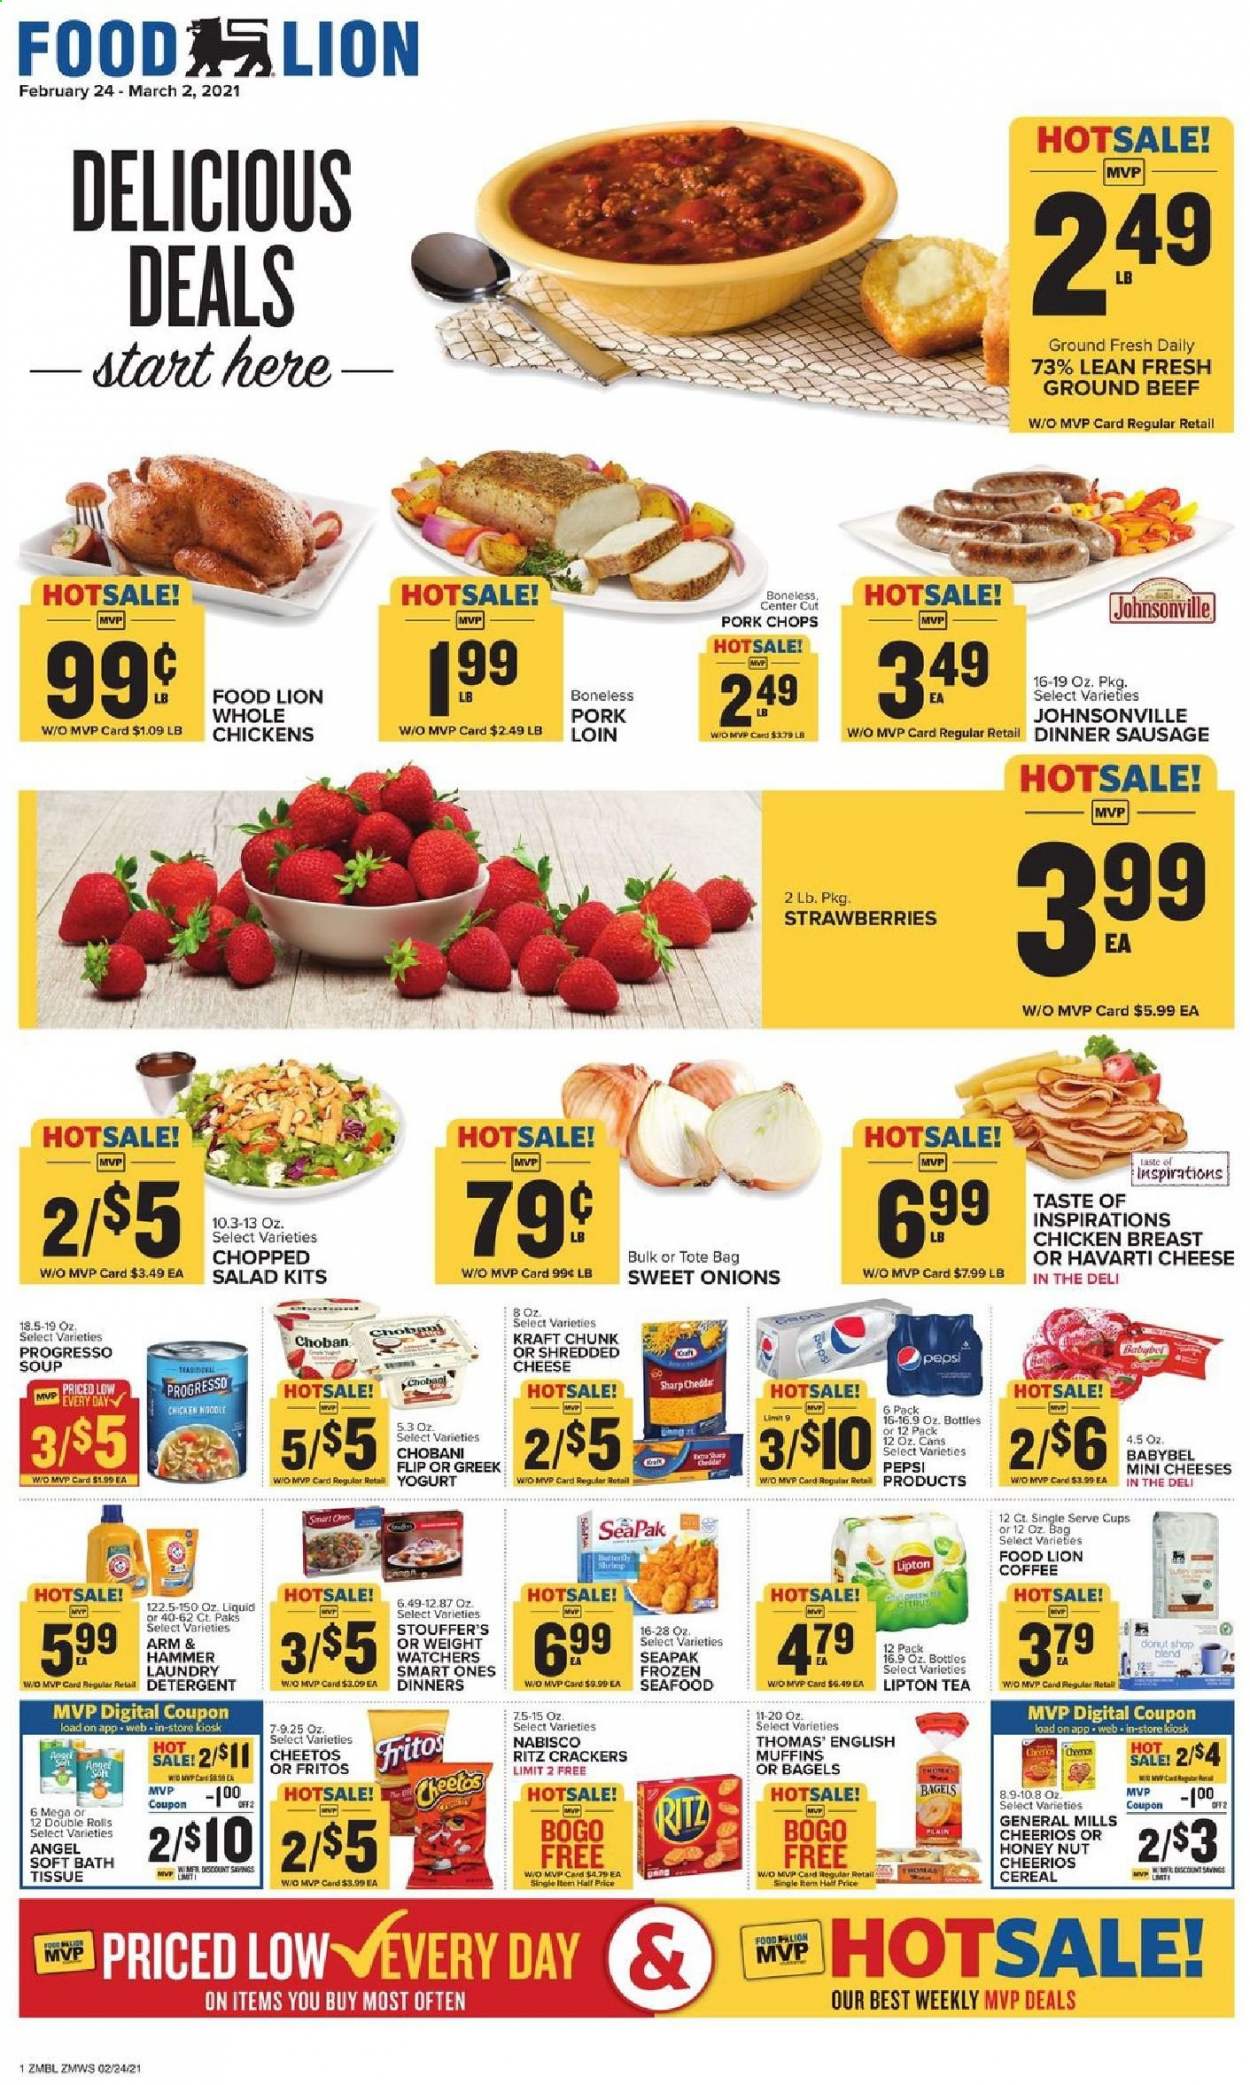 thumbnail - Food Lion Flyer - 02/24/2021 - 03/02/2021 - Sales products - Johnsonville, bagels, muffin, seafood, english muffins, salad, Progresso, Kraft®, sausage, shredded cheese, Havarti, cheddar, Babybel, yoghurt, strawberries, Stouffer's, crackers, RITZ, Cheetos, ARM & HAMMER, cereals, Fritos, Cheerios, noodles, Pepsi, Lipton, tea, coffee, chicken breasts, beef meat, ground beef, pork loin, pork meat, bath tissue, detergent, cup, Sharp. Page 1.